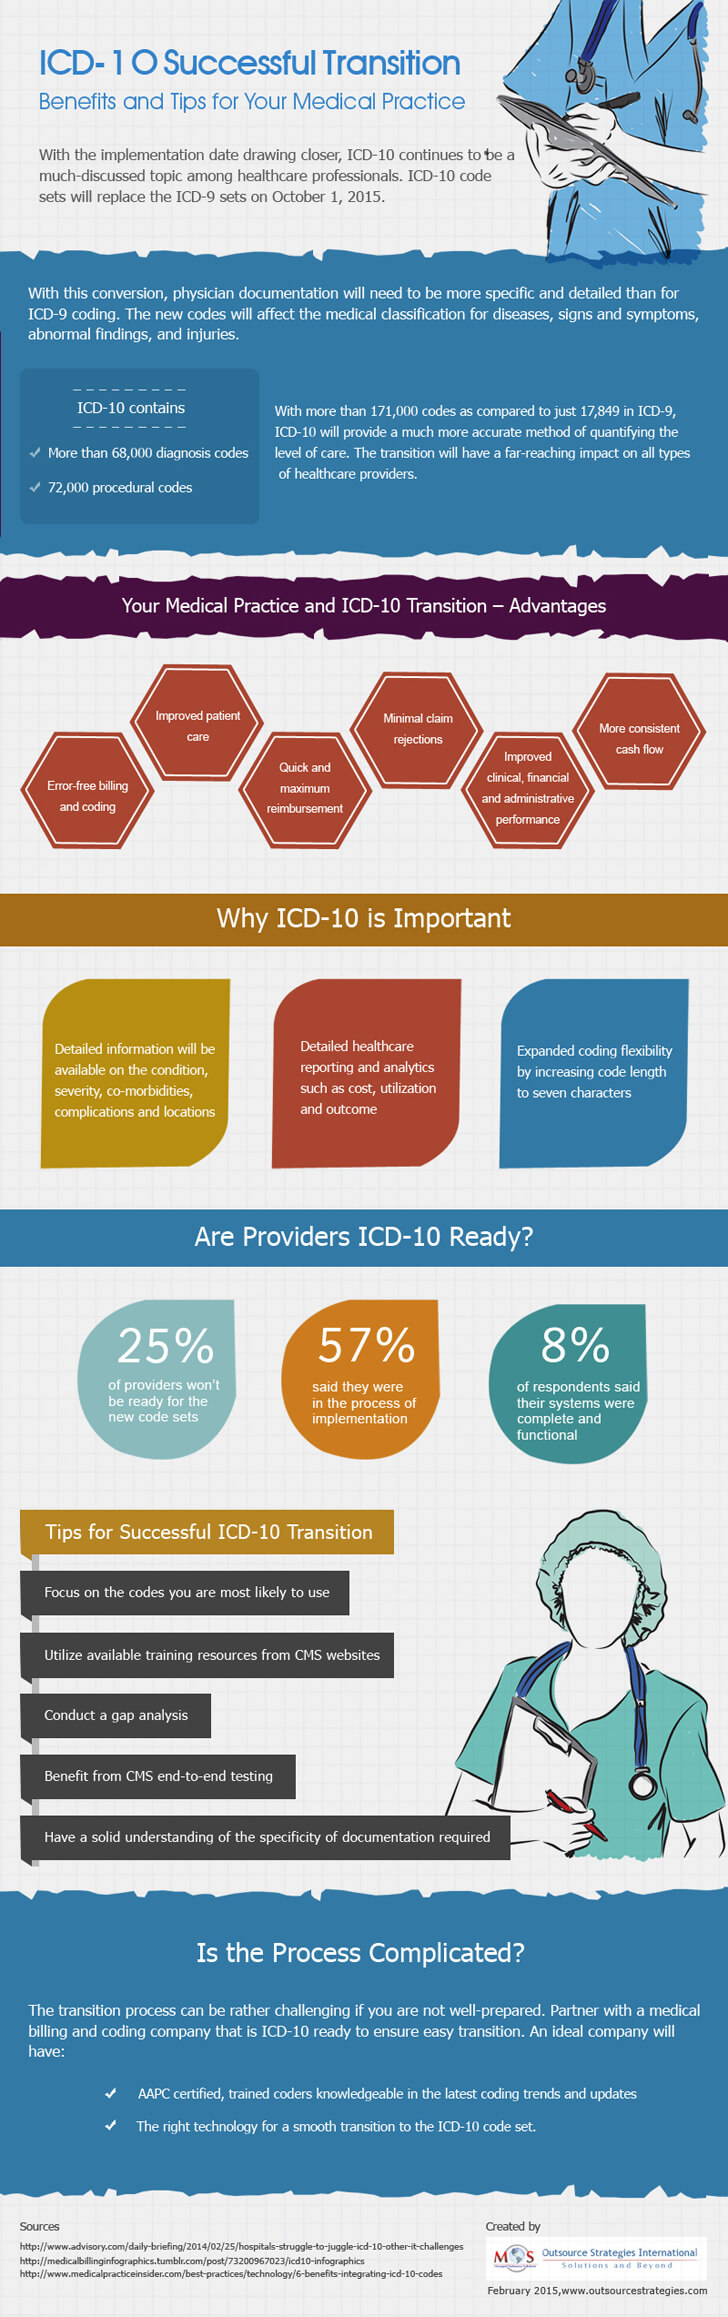 ICD-10 Successful Transition